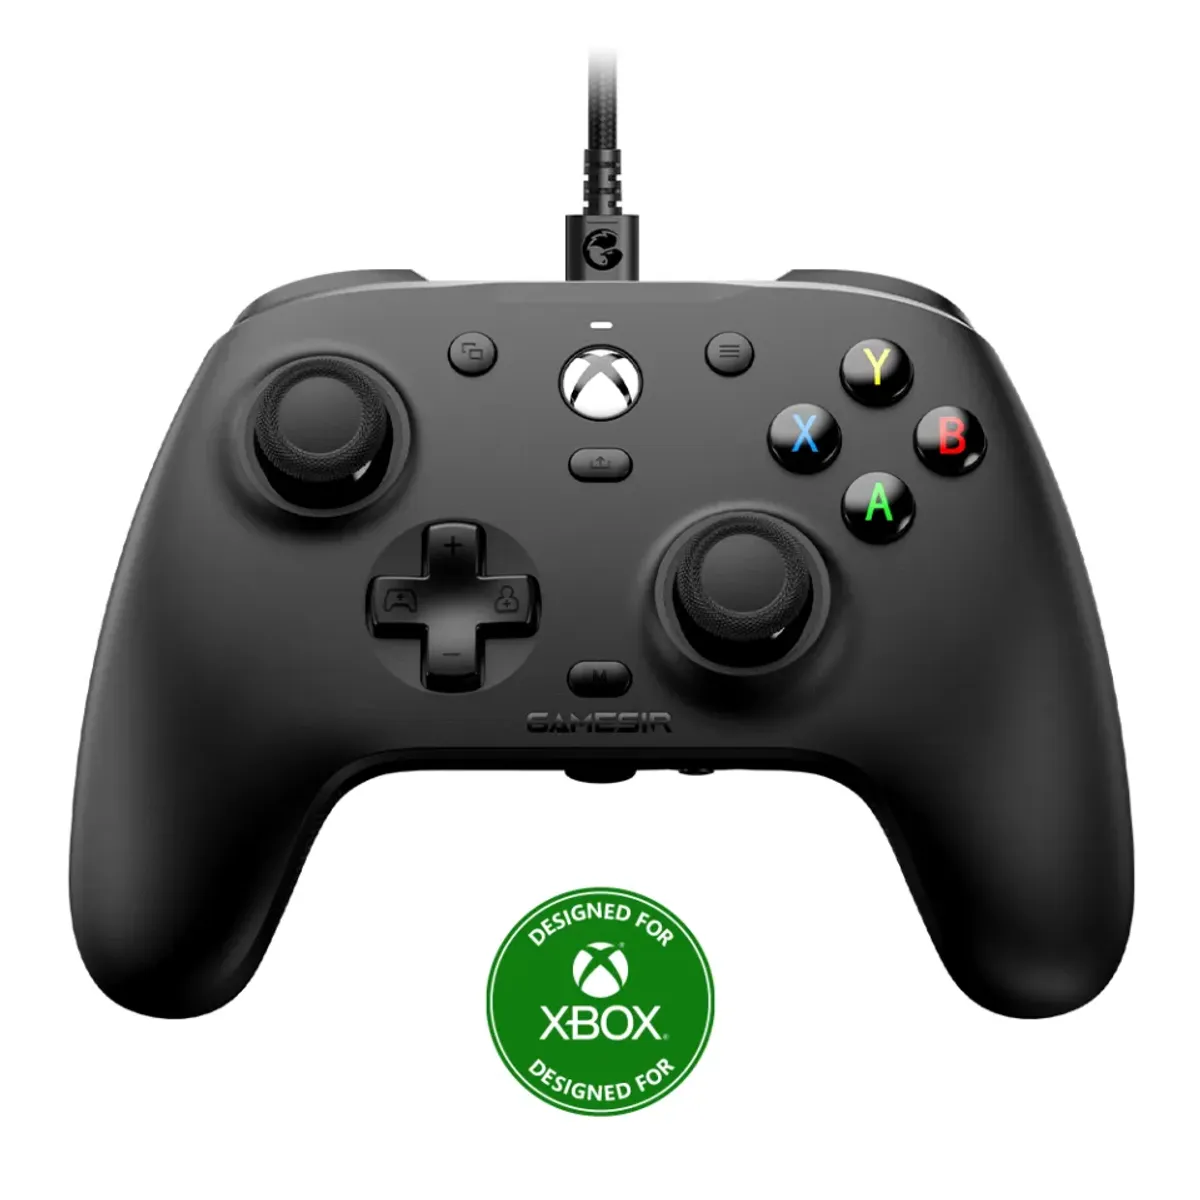 Product Review - GameSir G7 Wired Controller Gamepad